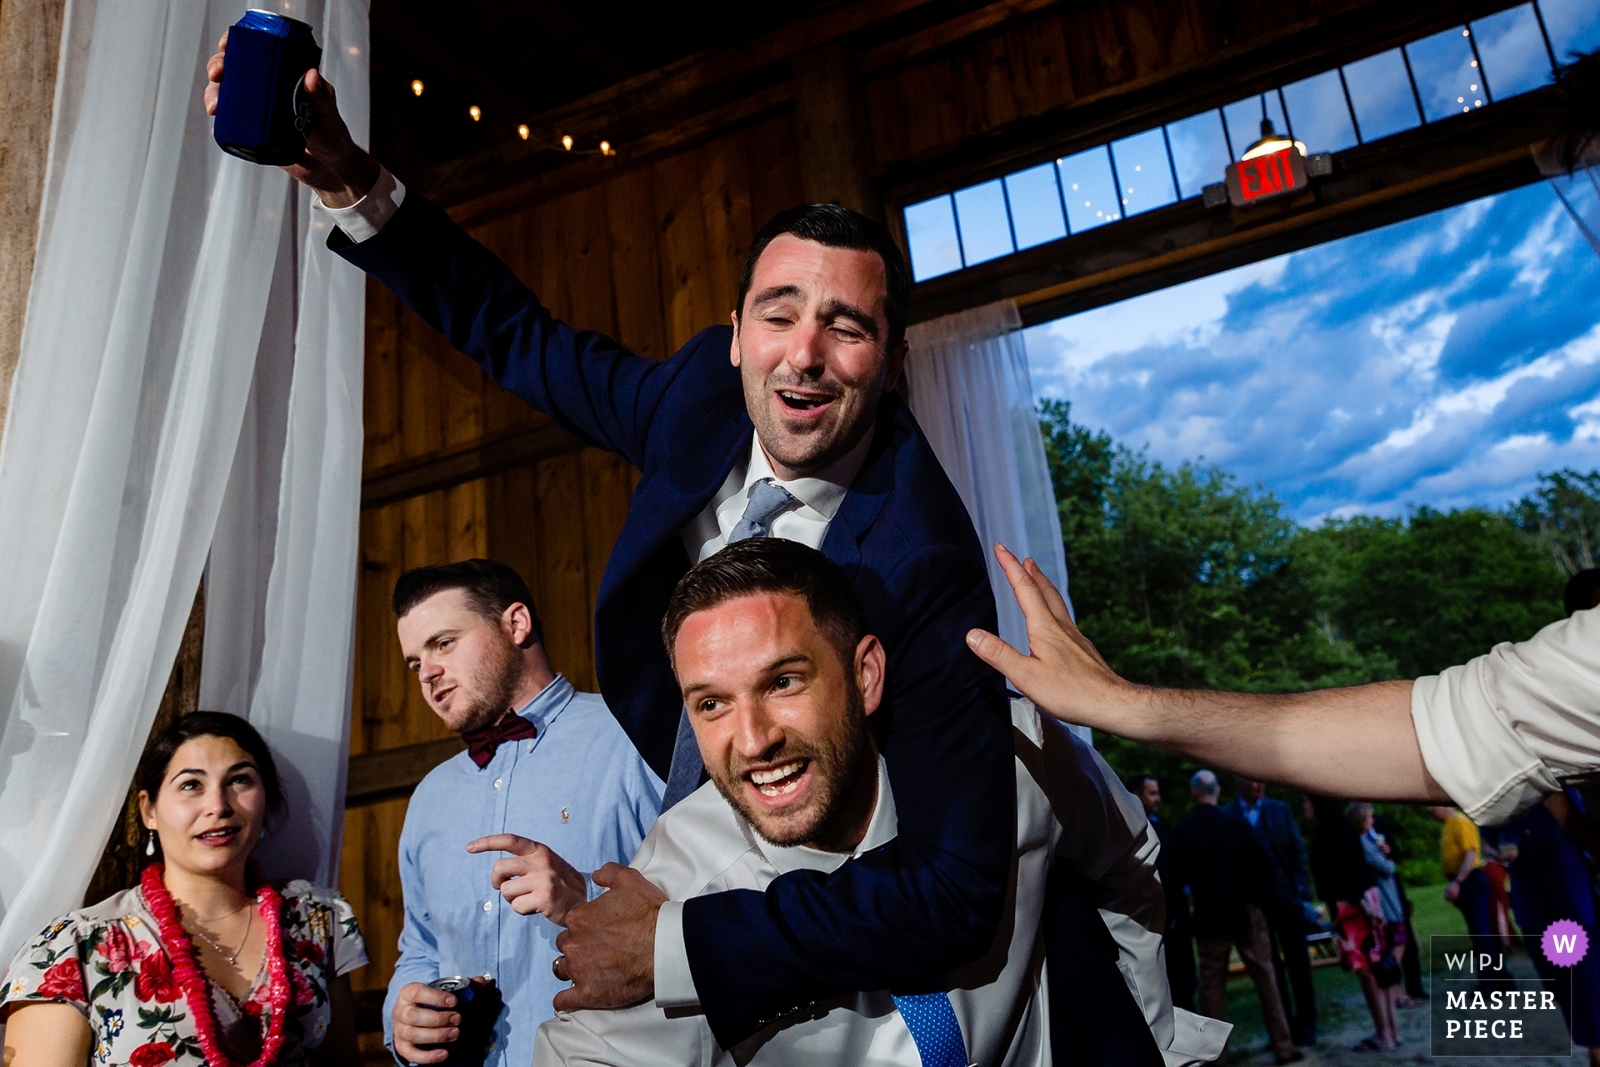 The groom and his best man get the party going as they make their way to the Kitz Farm wedding reception in NH